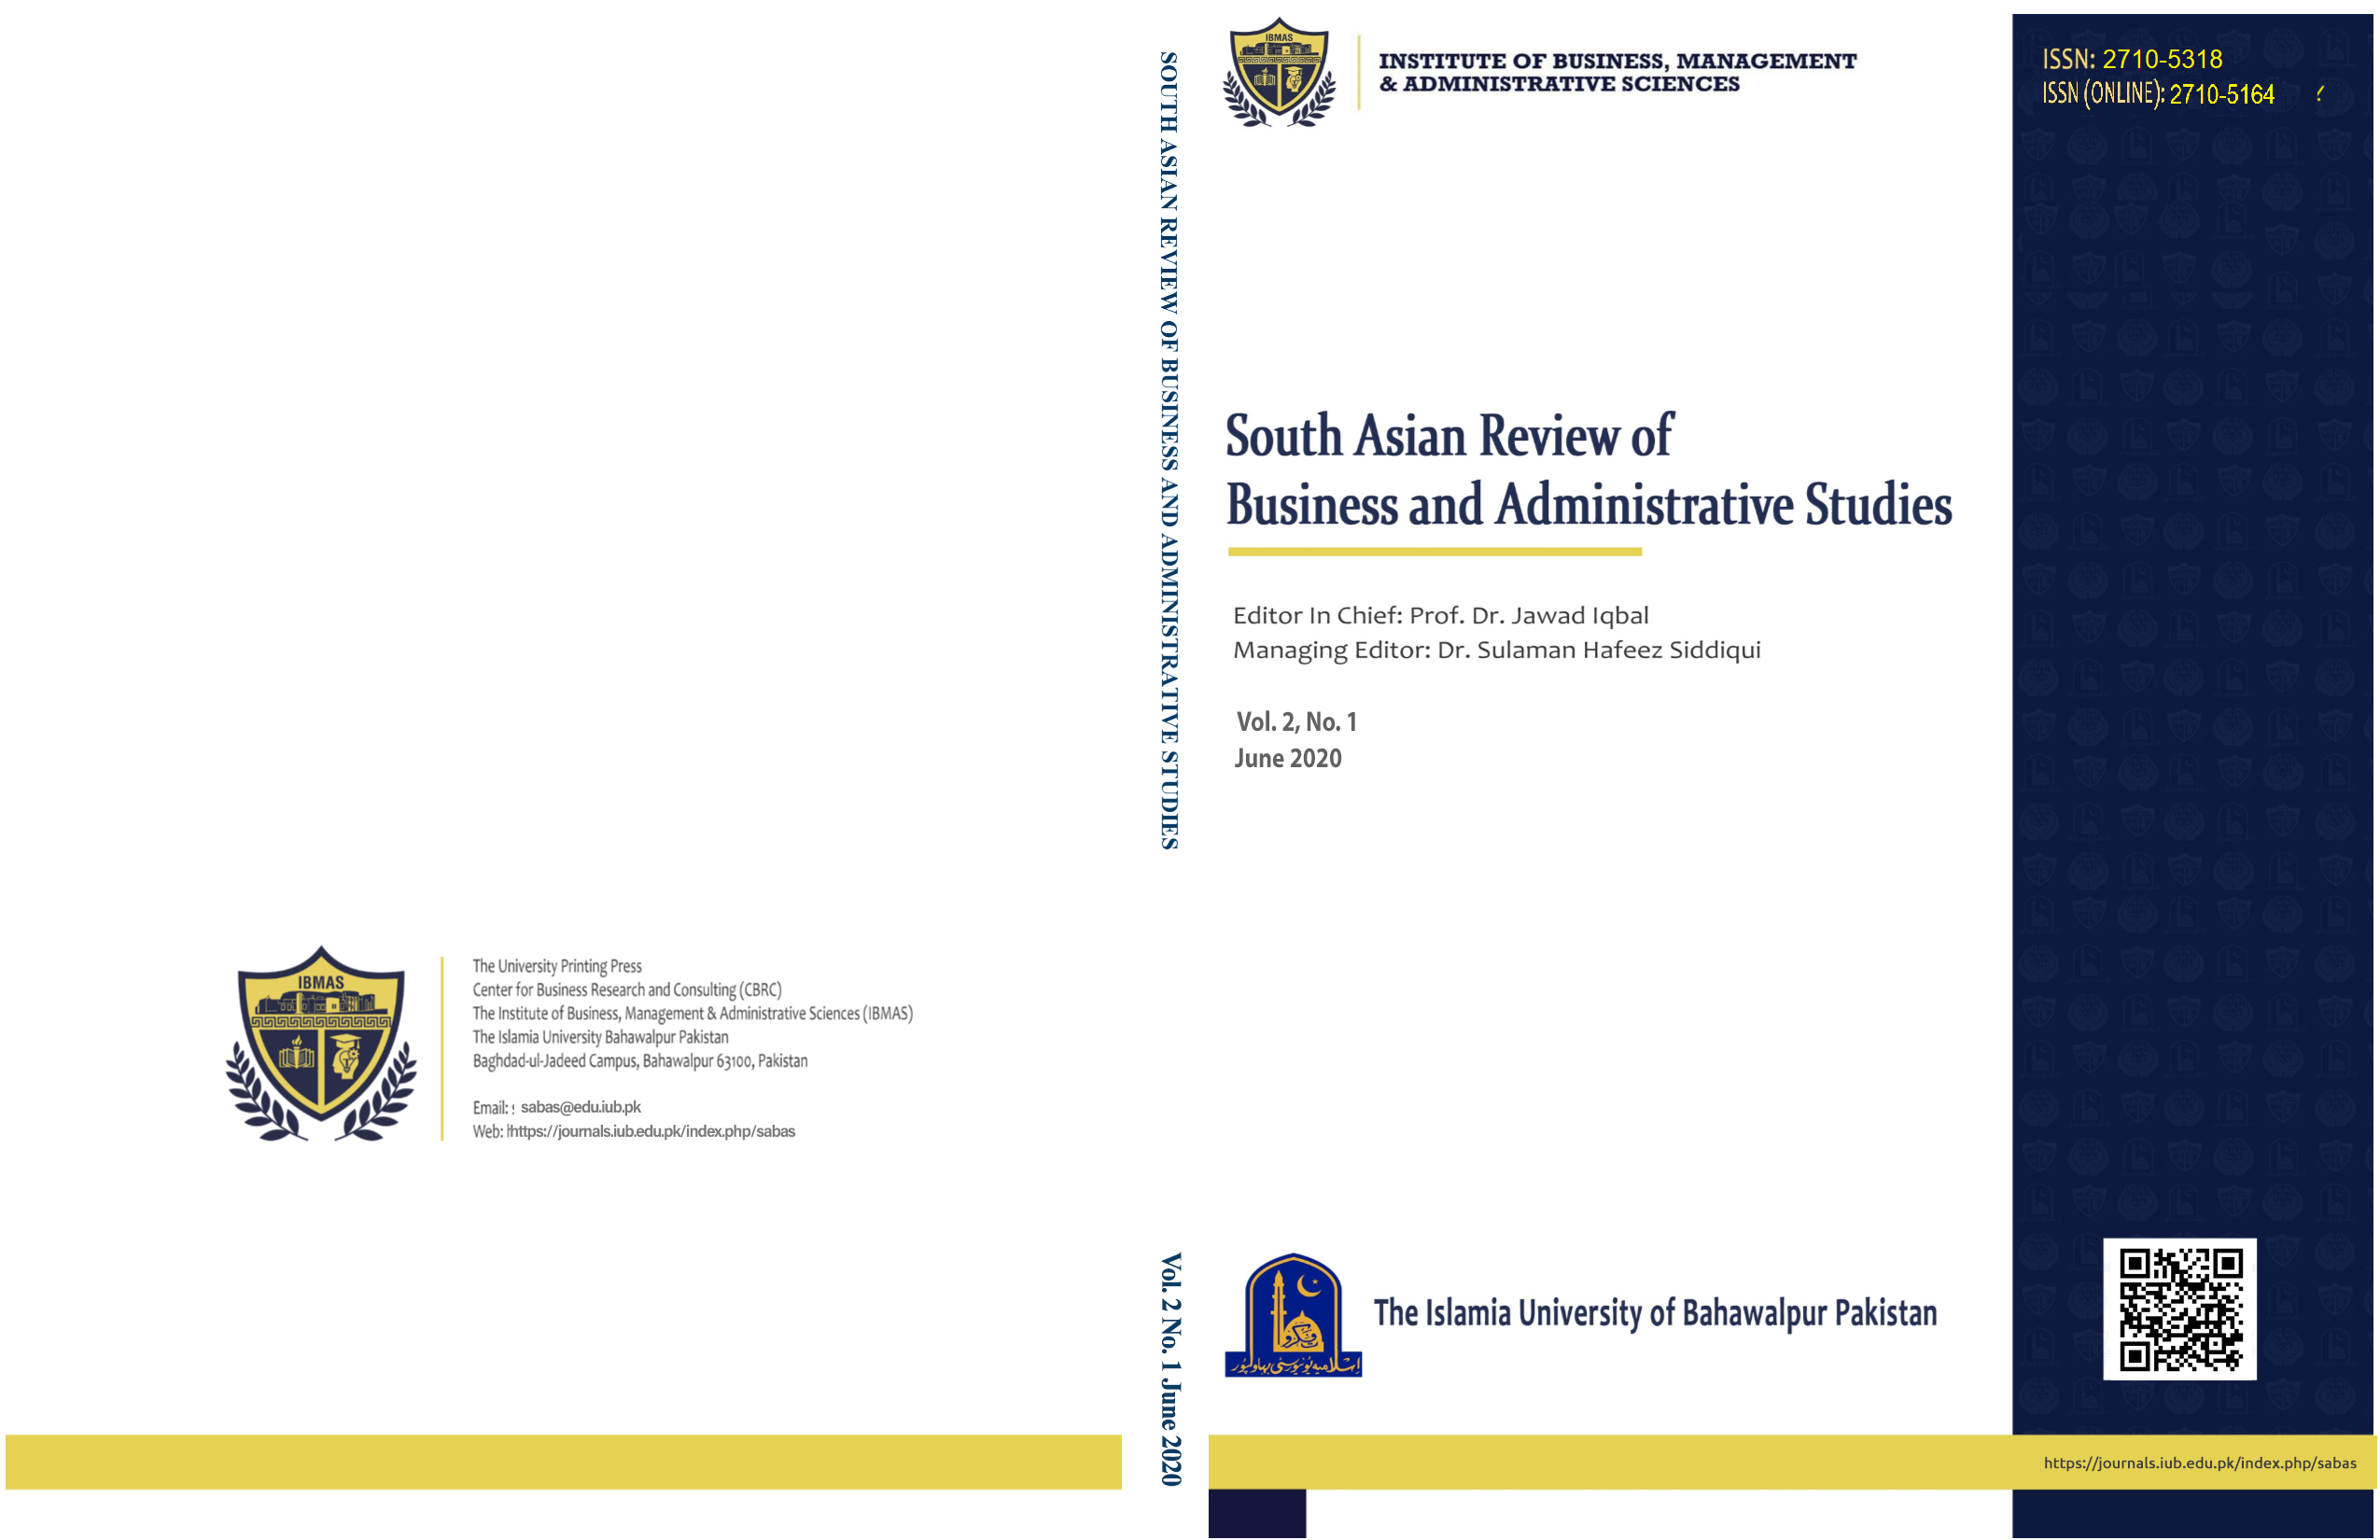 South Asian Review of Business and Administrative Studies